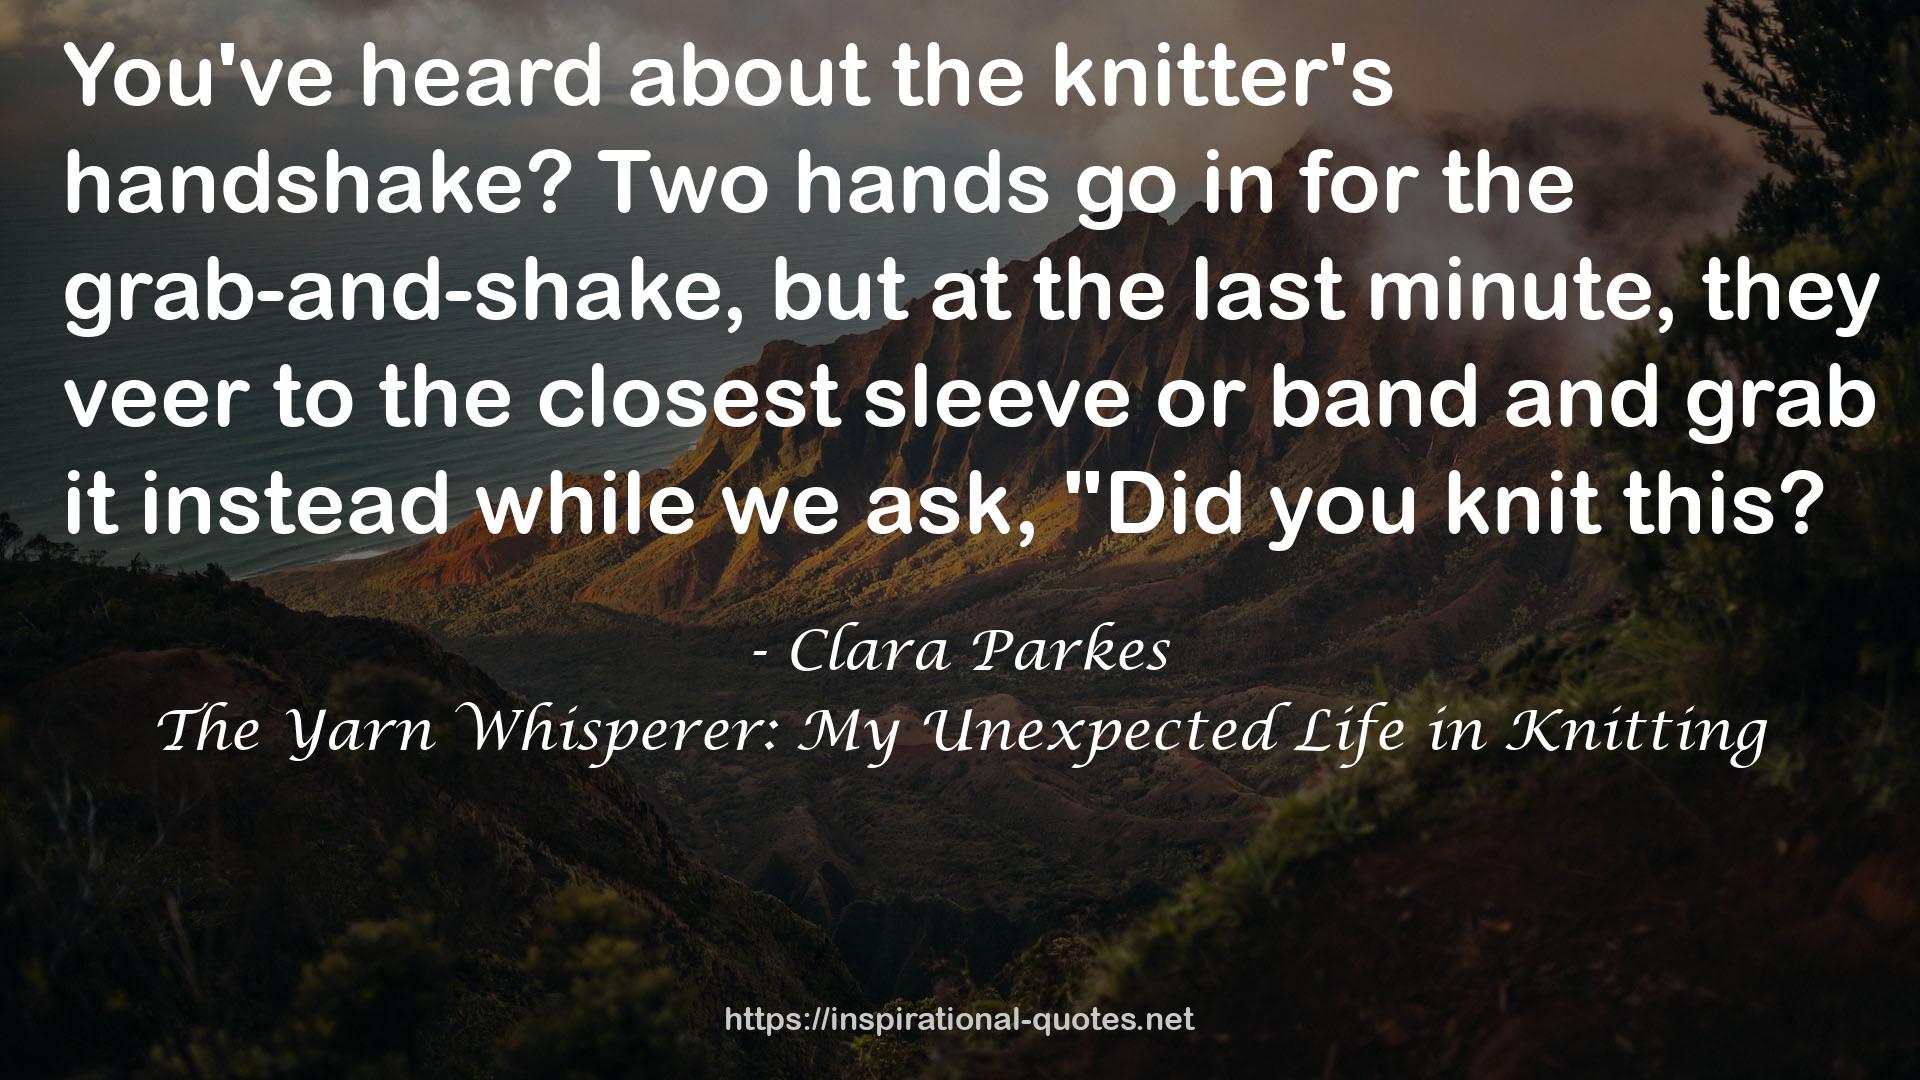 The Yarn Whisperer: My Unexpected Life in Knitting QUOTES